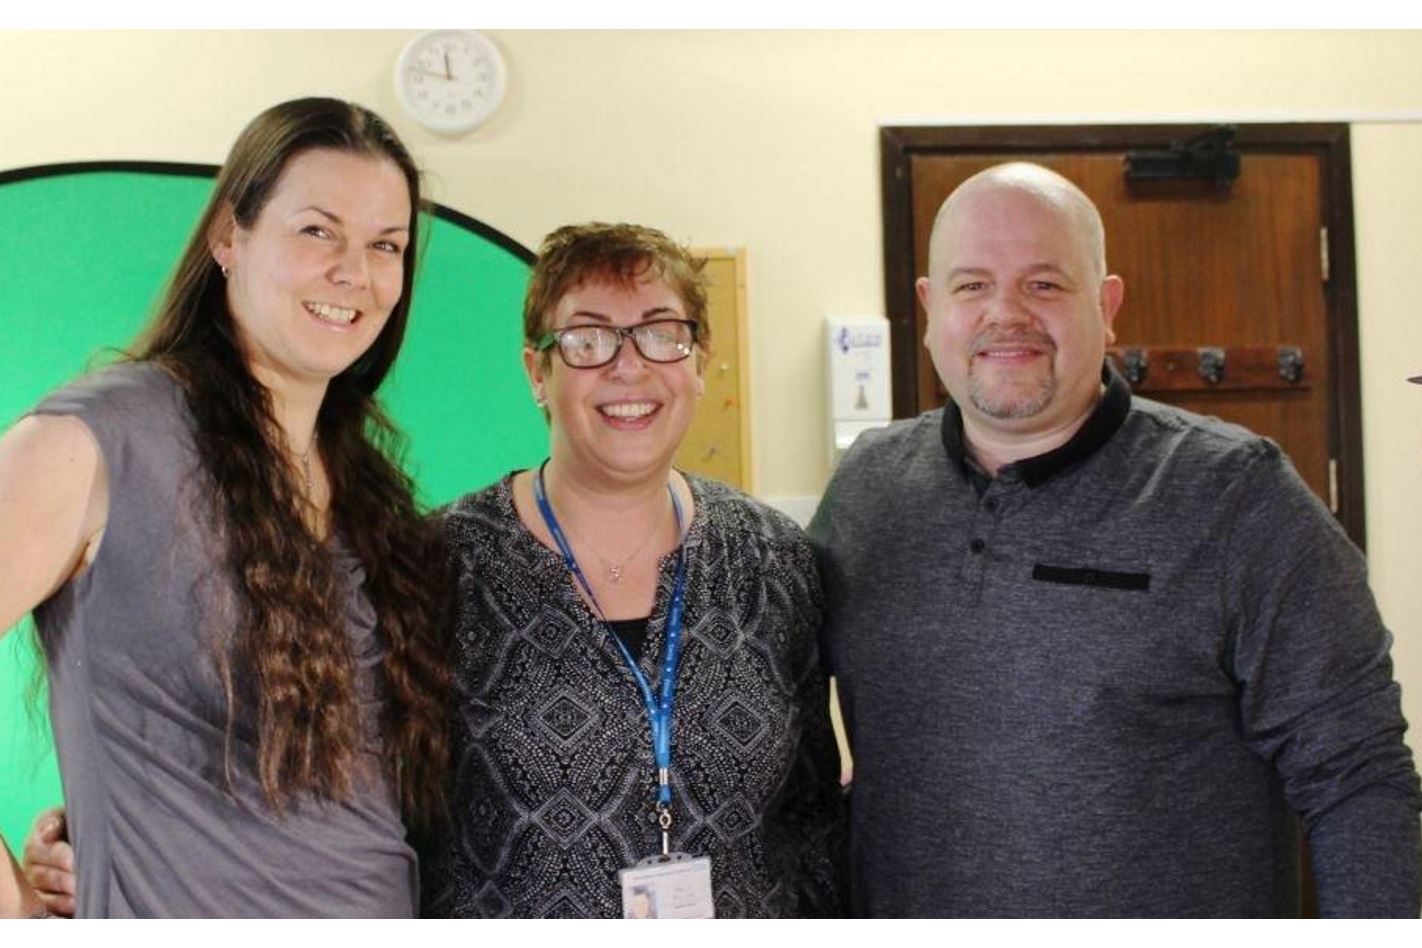 From the left: Nicky Byrne (mum), Penny Dougan (health visitor), film maker that BCHC are using to make a film about Health Visiting which includes Nicky.